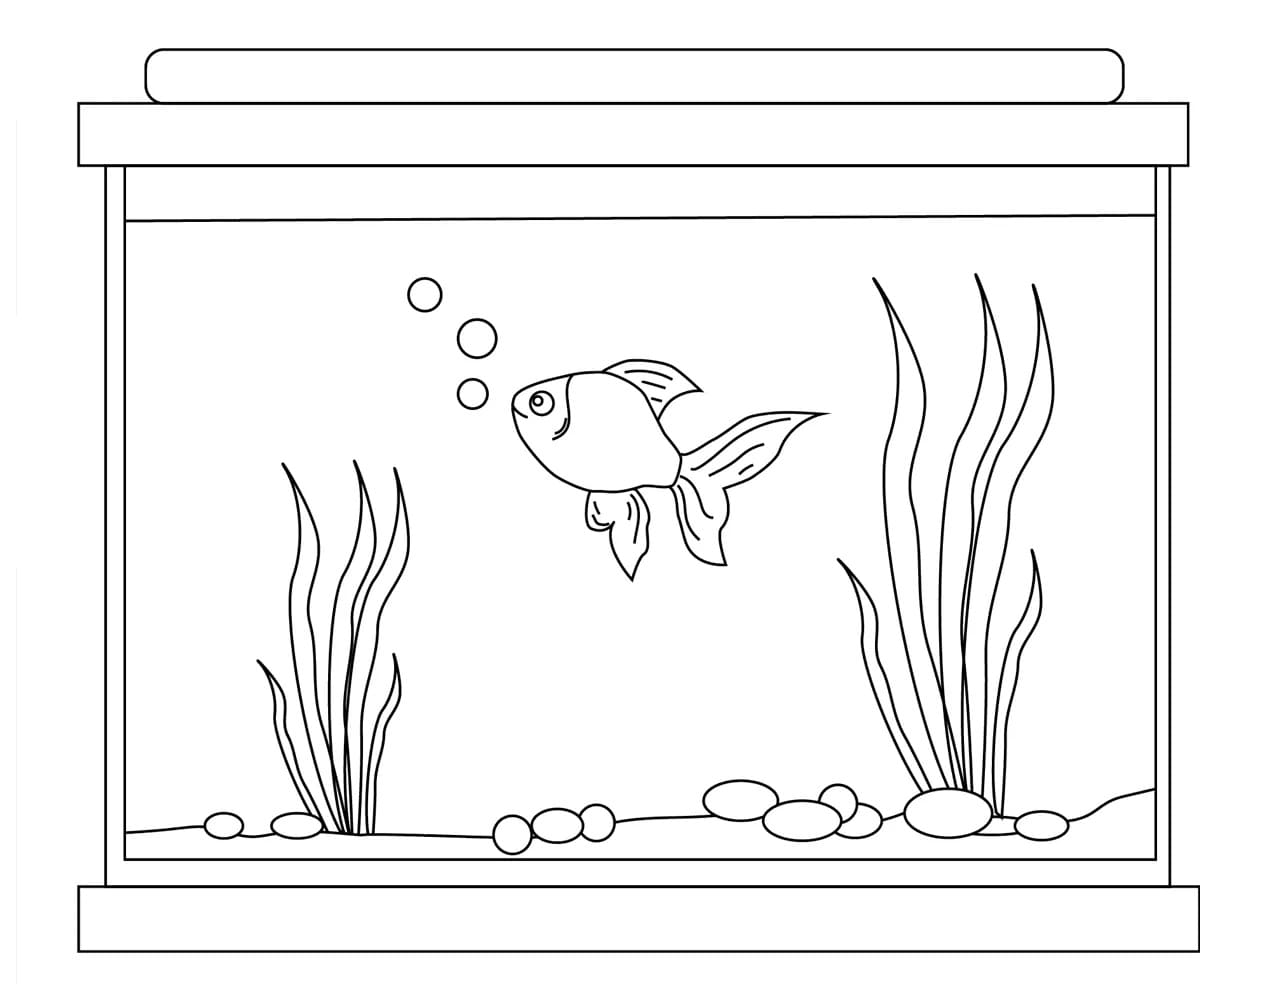 empty bowl coloring pages